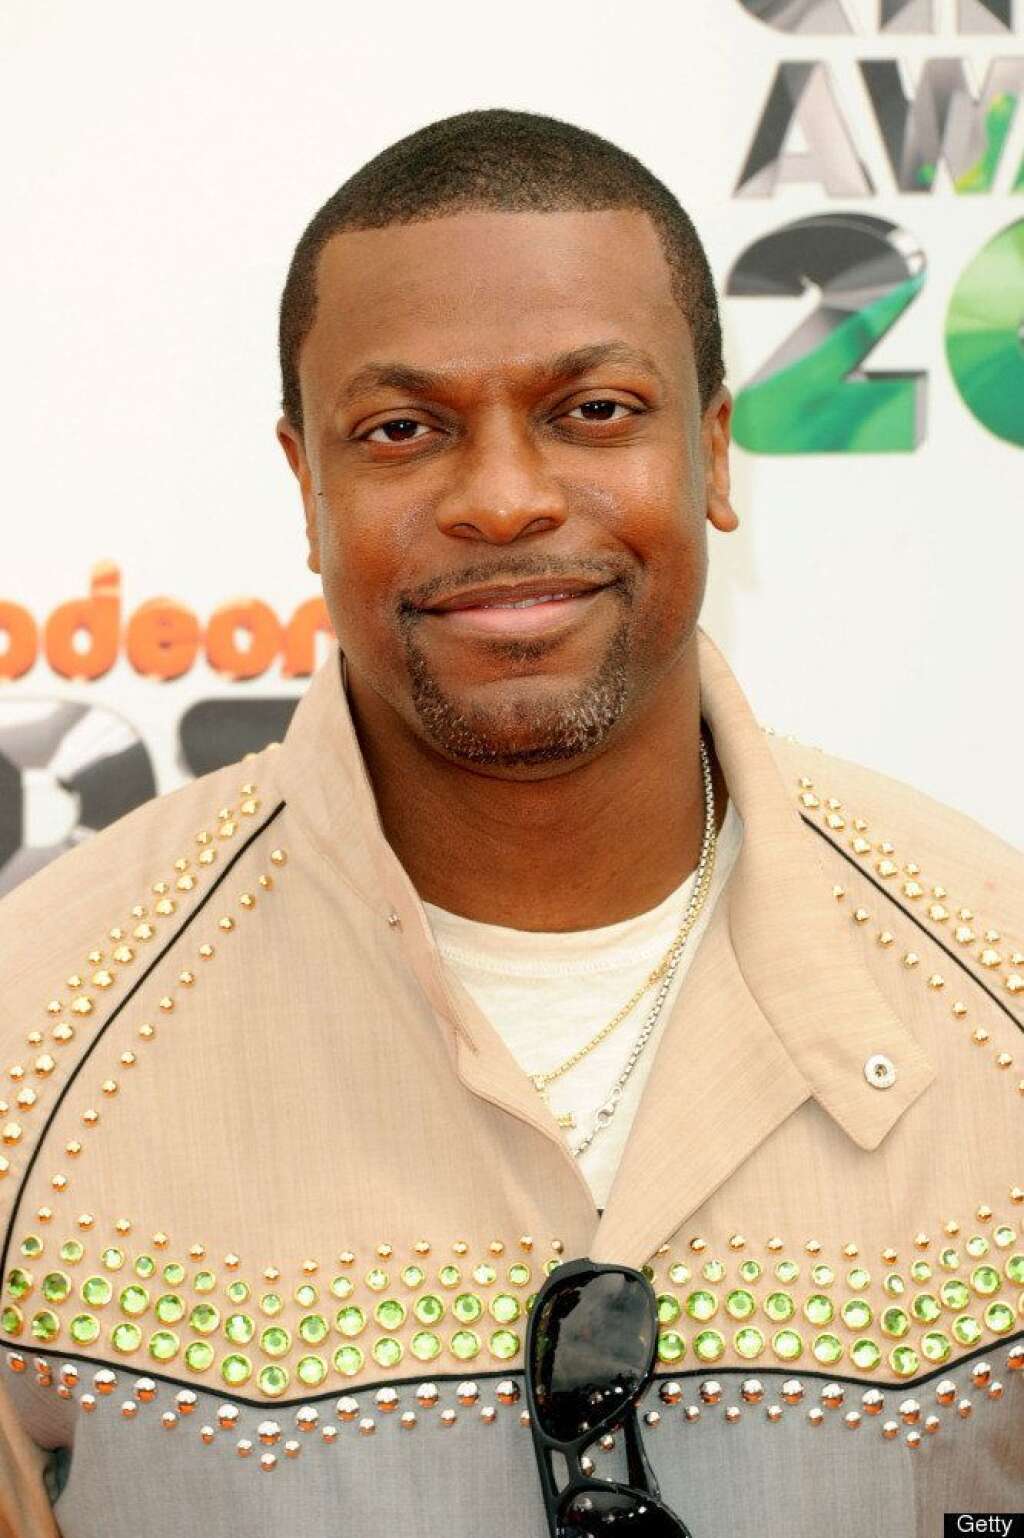 Chris Tucker - Actor Chris Tucker had a <a href="http://newsone.com/1883935/wow-chris-tucker-now-owes-over-12-million-in-taxes/" target="_hplink">tax lien filed against him in the state of Georgia earlier this year</a> for $592,594.08, plus $11,571,909.26 from the federal government for taxed owed in 2001, 2002 and 2004 through 2006.